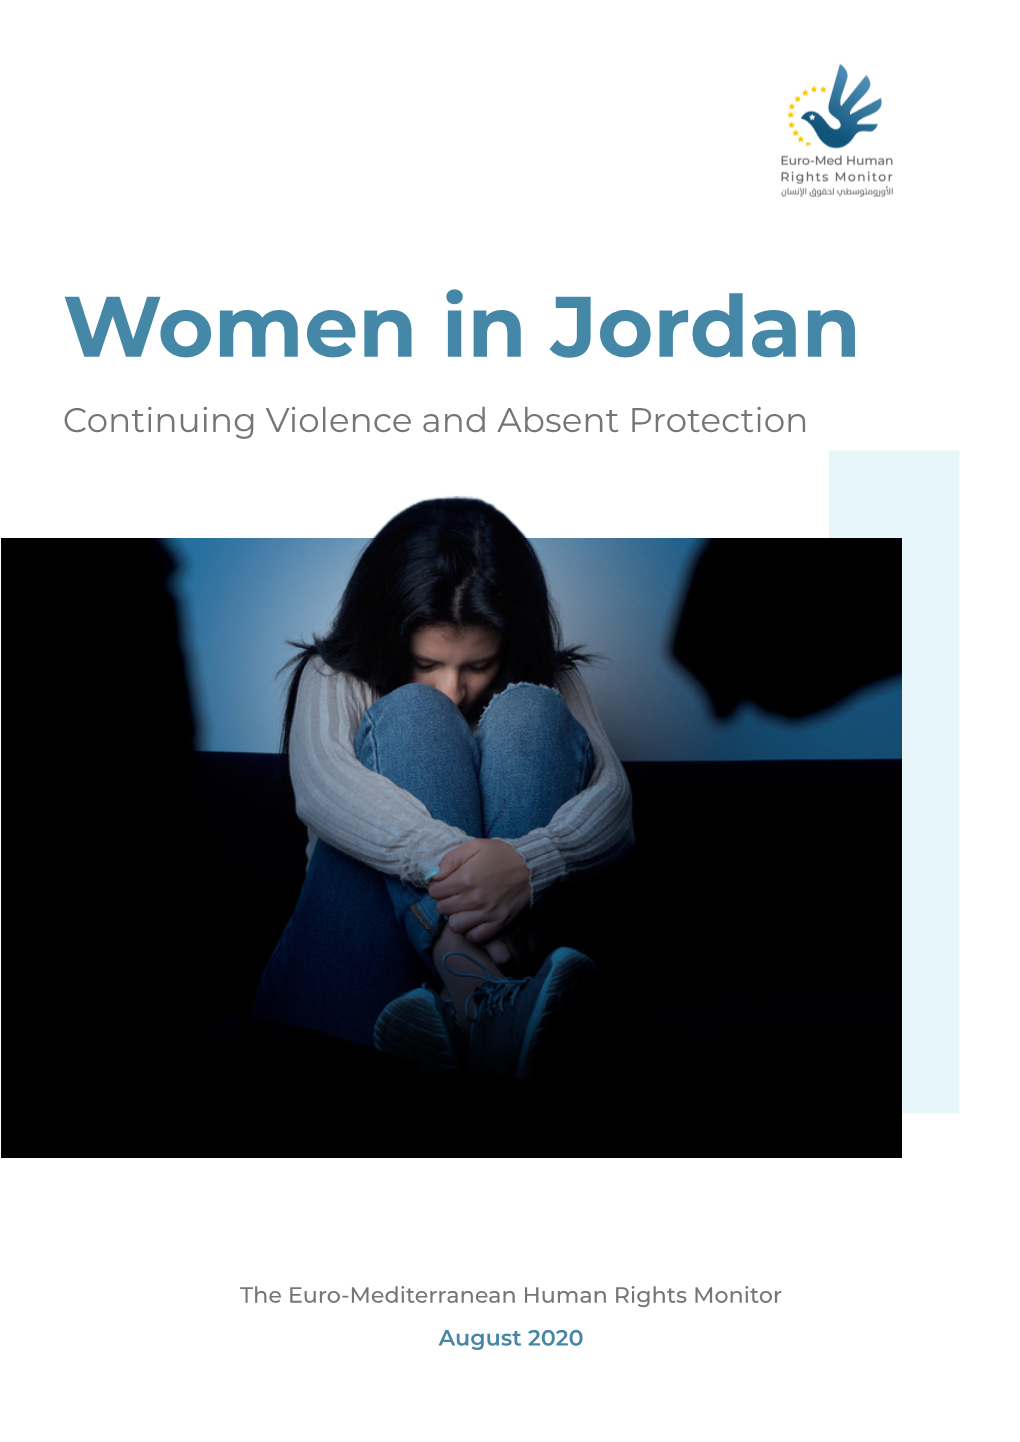 Women in Jordan Continuing Violence and Absent Protection